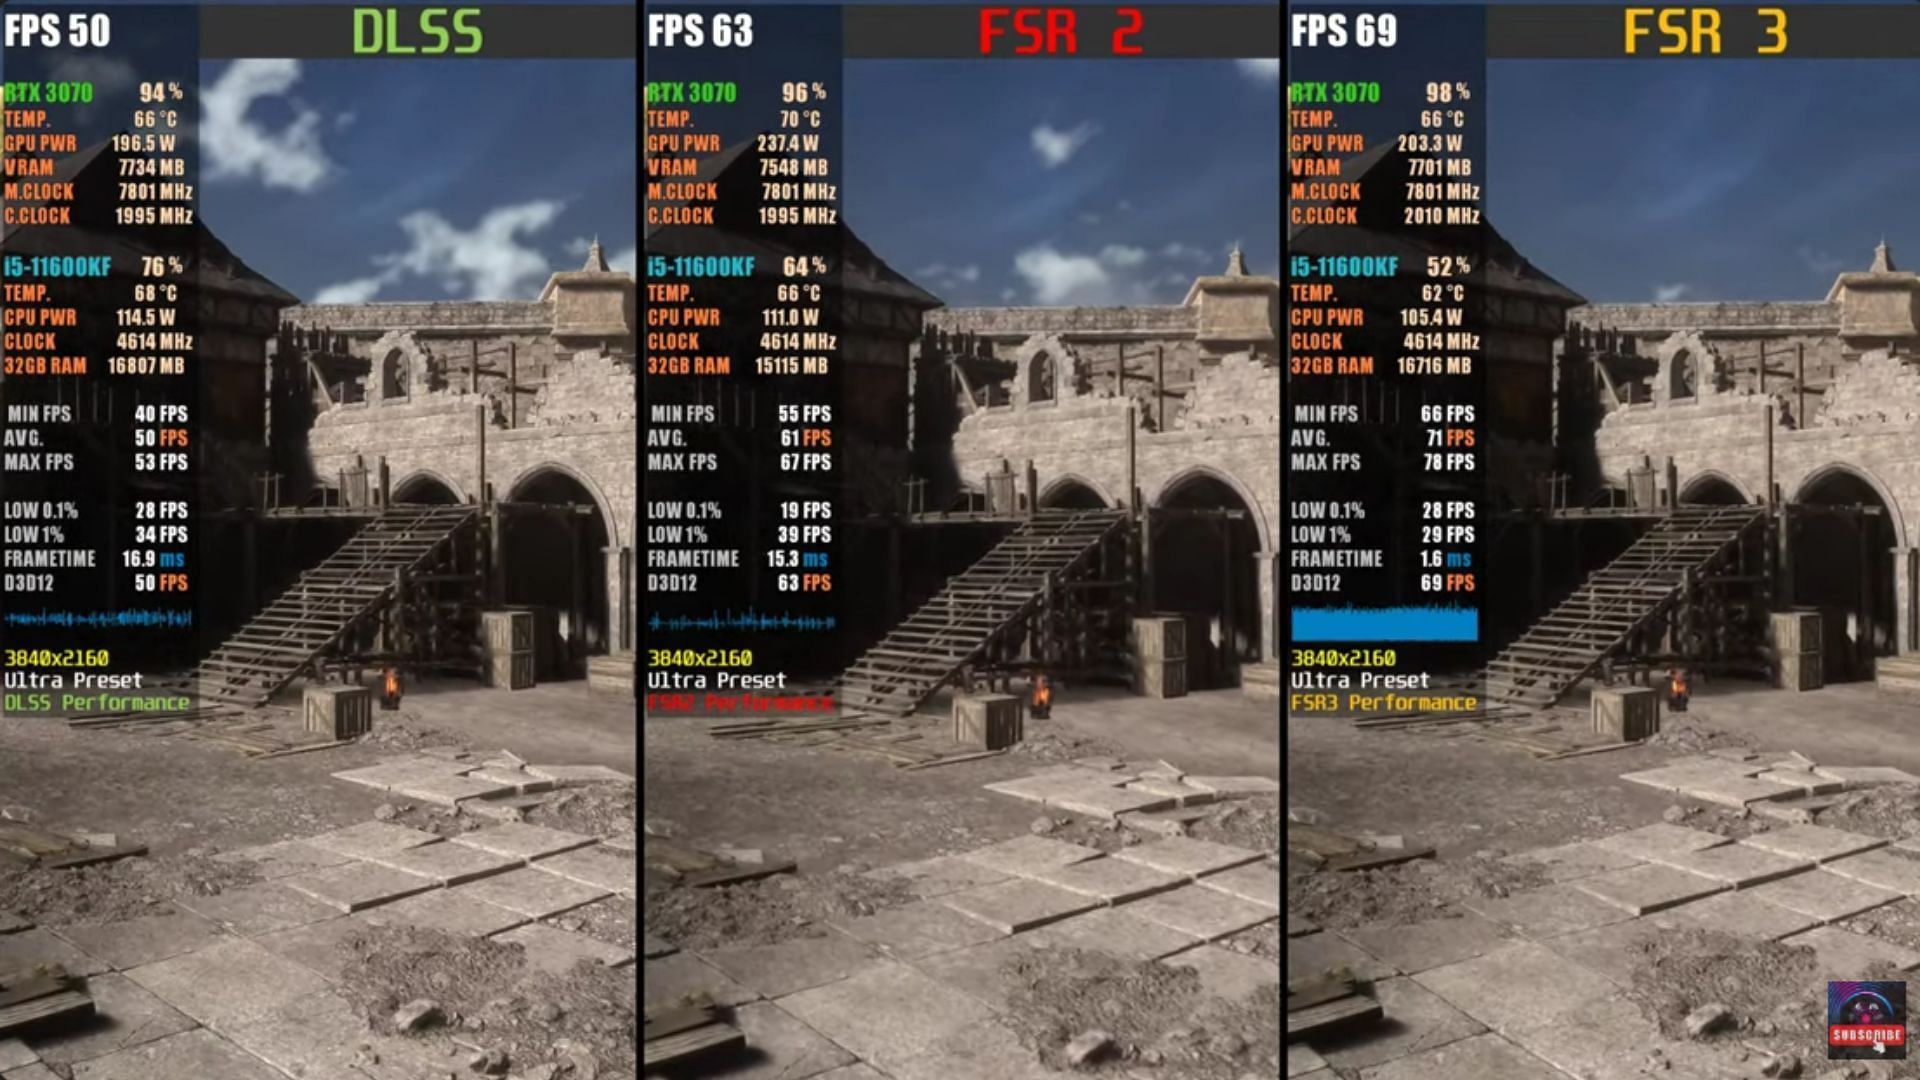 FSR manages to put up greater framerates compared to DLSS (Image via YouTube/Deity Gaming Power)